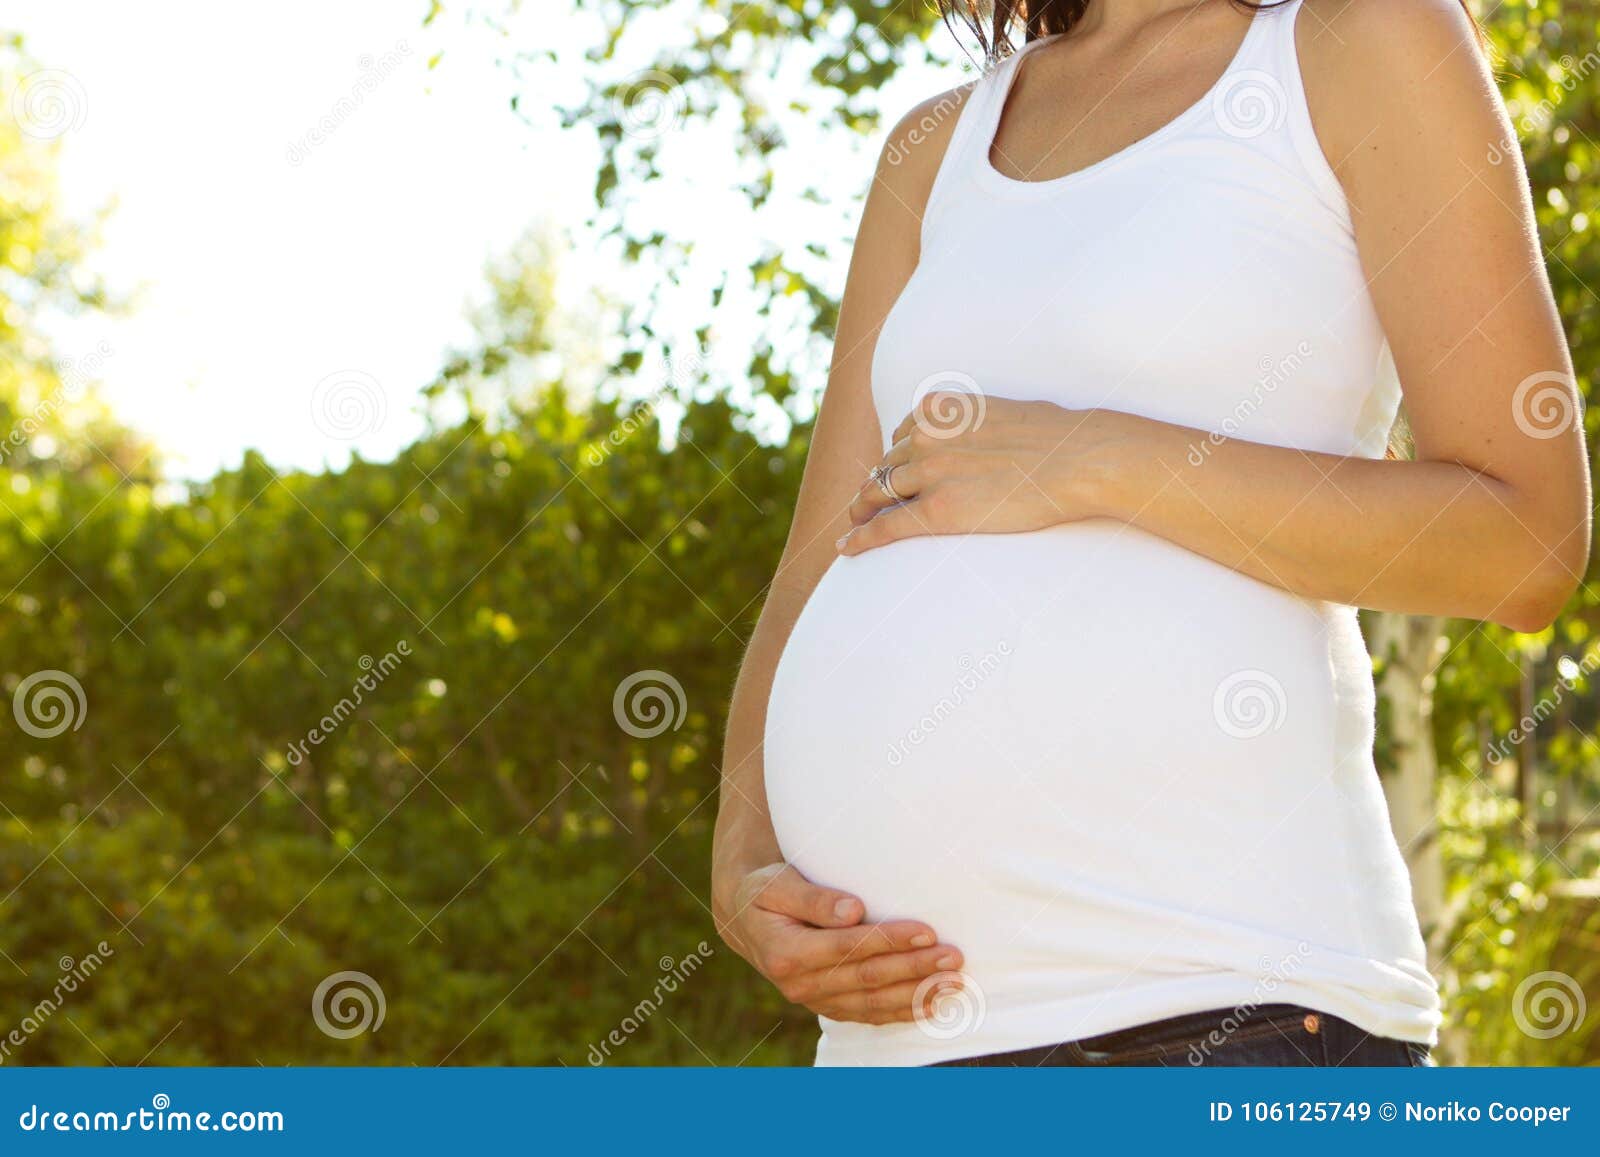 Happy Pregnant Woman Outside In Nature Stock Image Image Of Standing